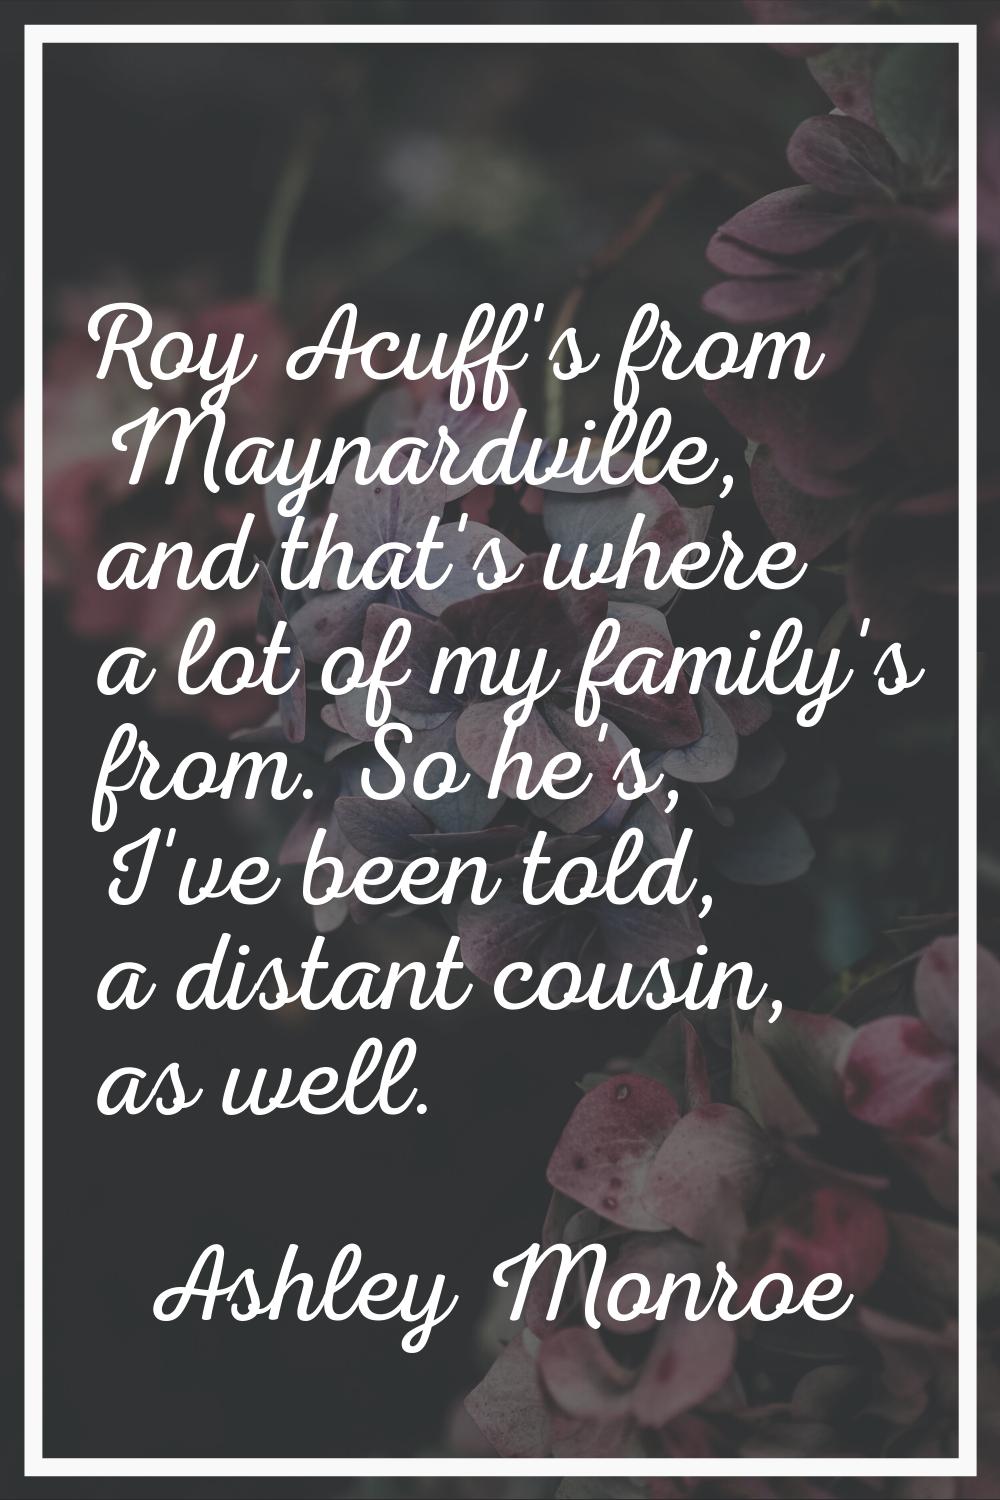 Roy Acuff's from Maynardville, and that's where a lot of my family's from. So he's, I've been told,